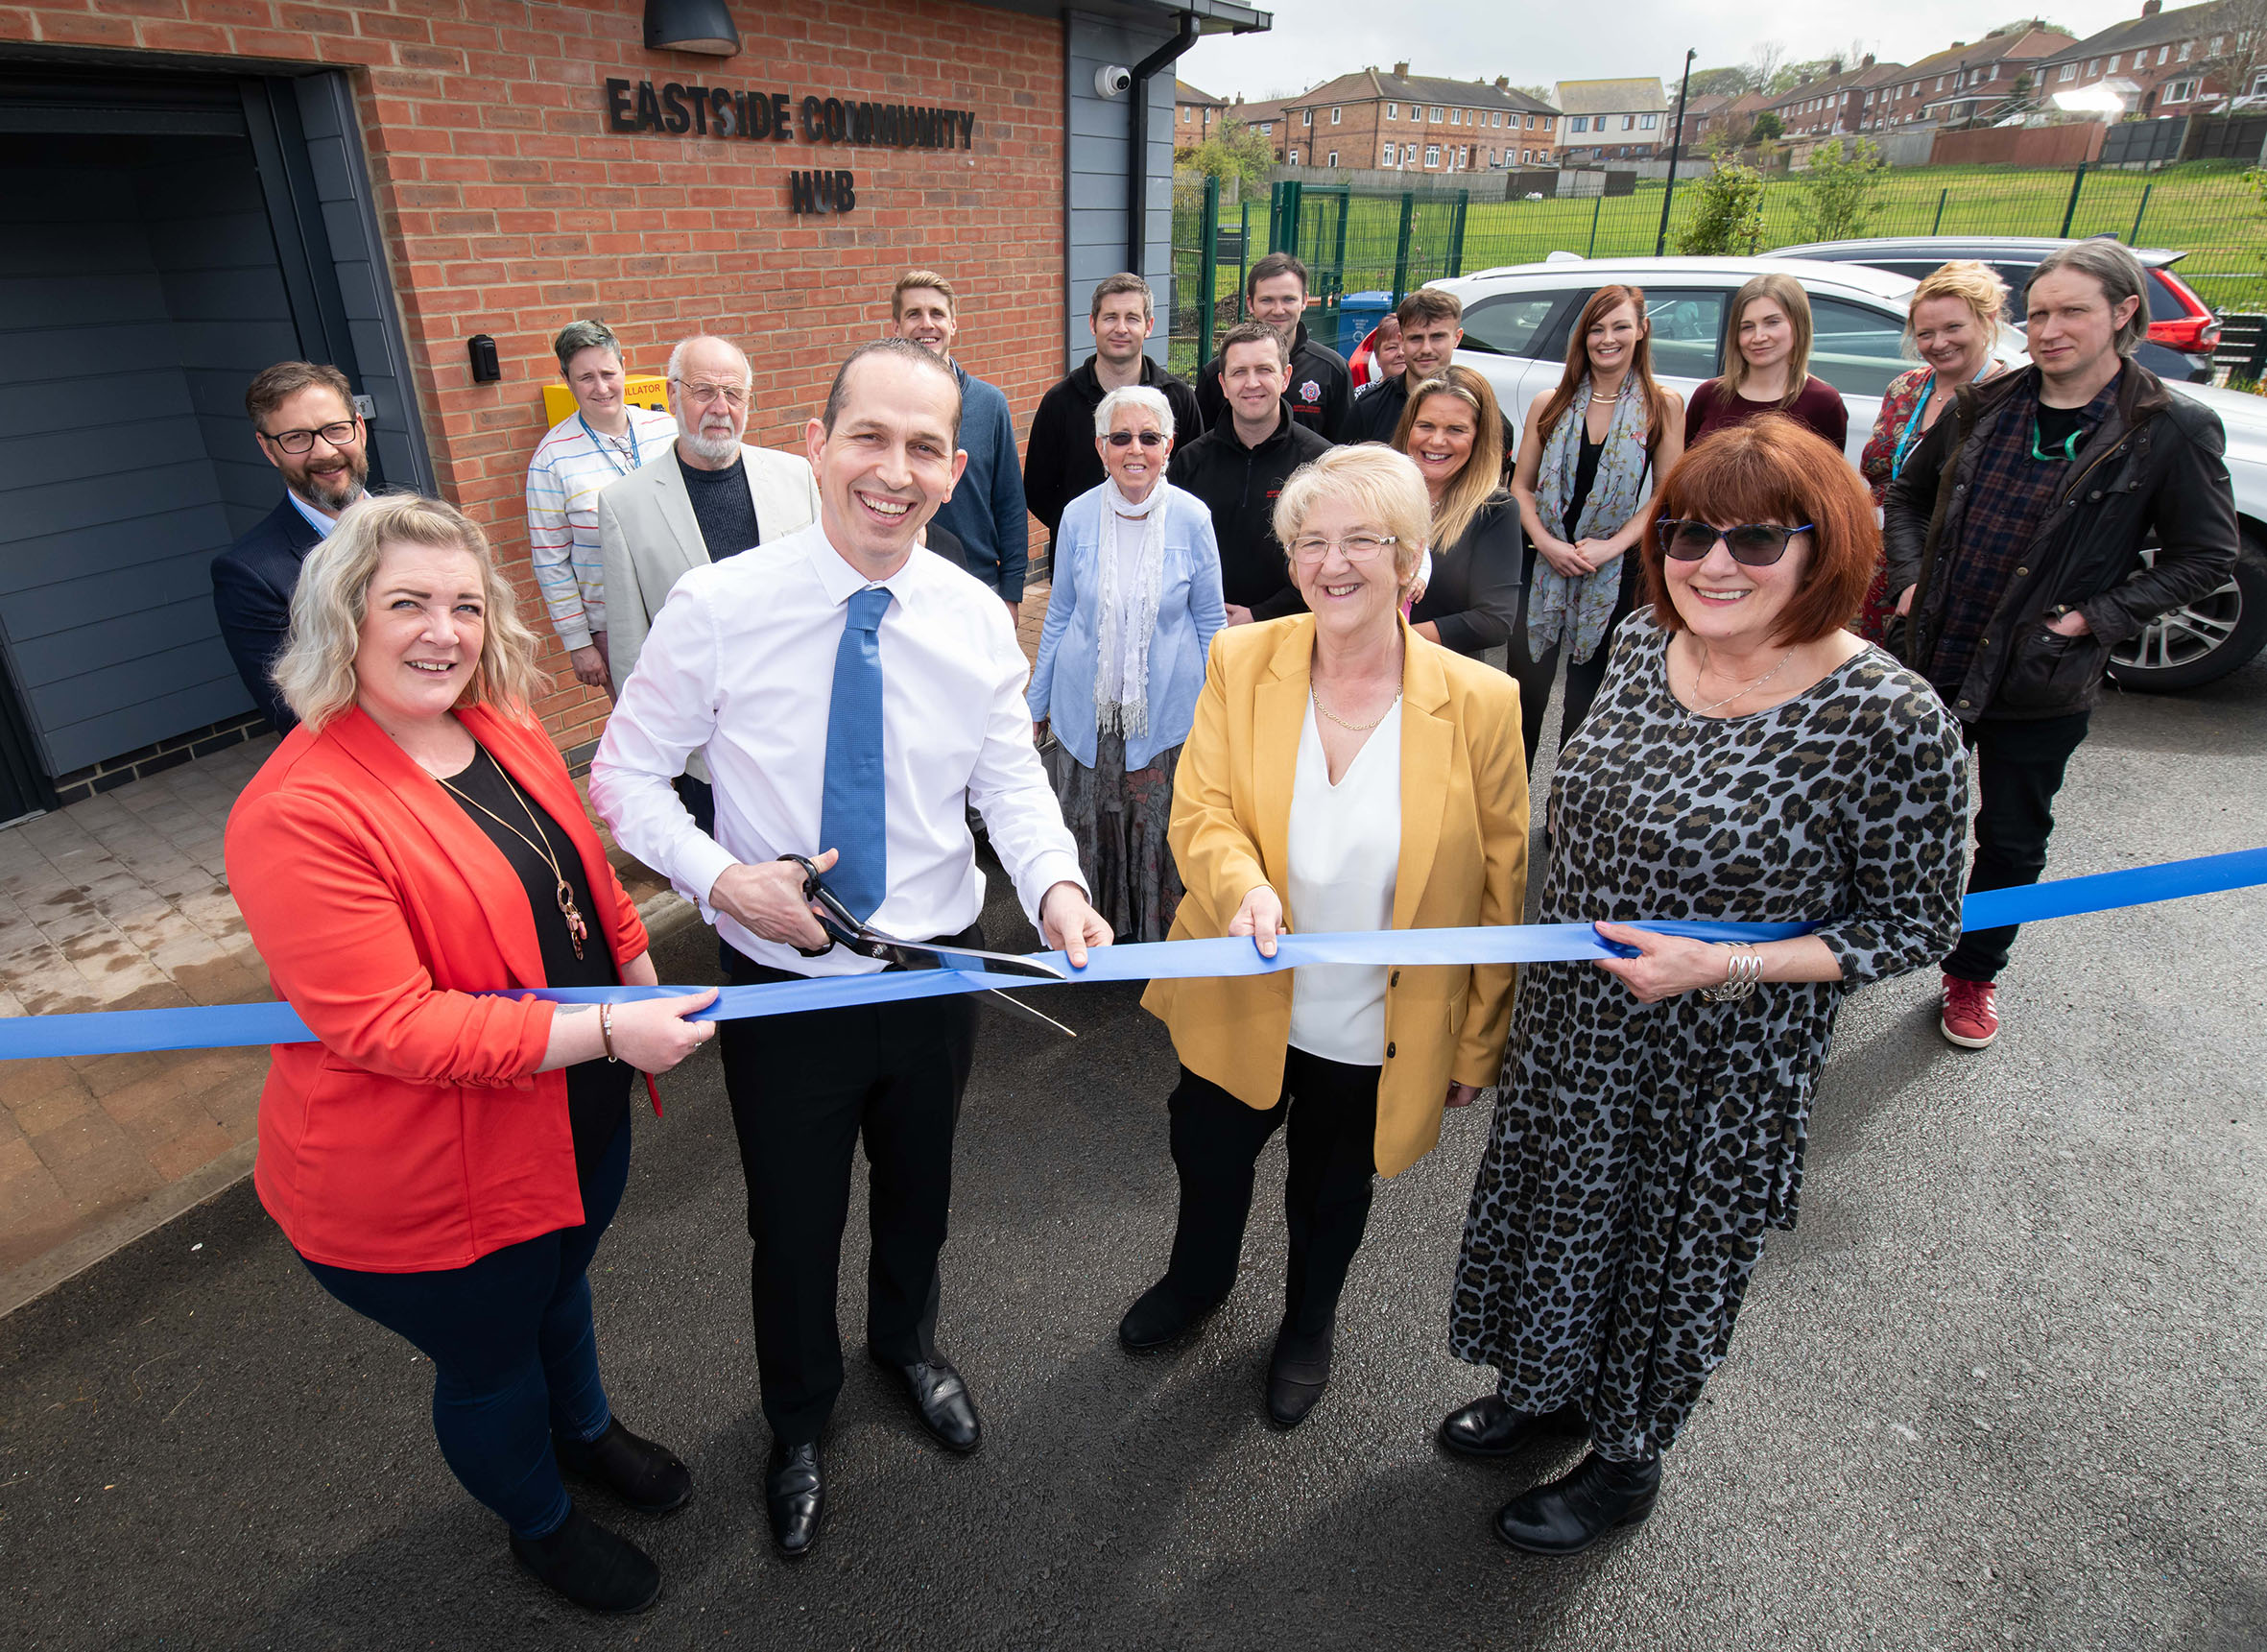 Cutting the ribbon at the opening of Eastside Community Hub